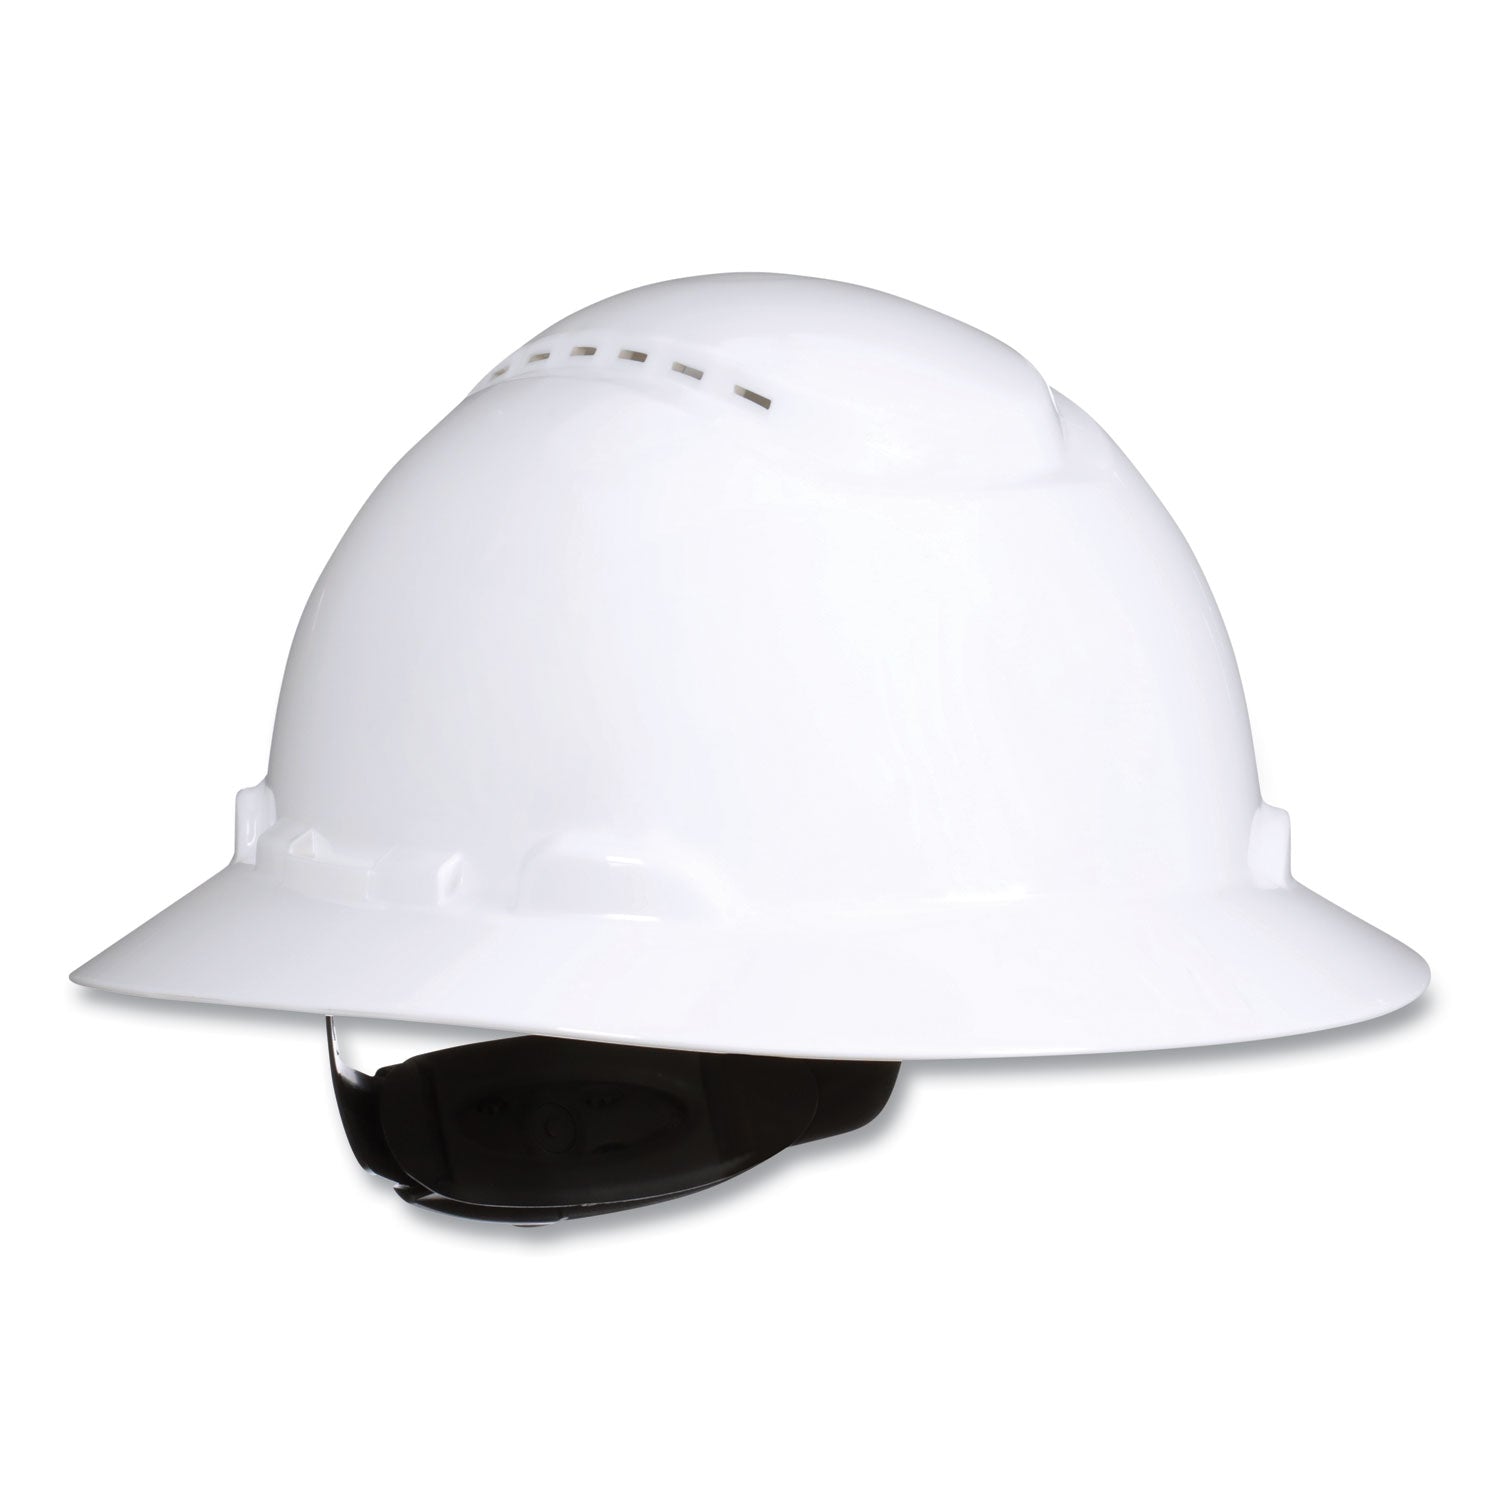 securefit-h-series-hard-hats-h-800-vented-hat-with-uv-indicator-4-point-pressure-diffusion-ratchet-suspension-white_mmmh801sfvuv - 1